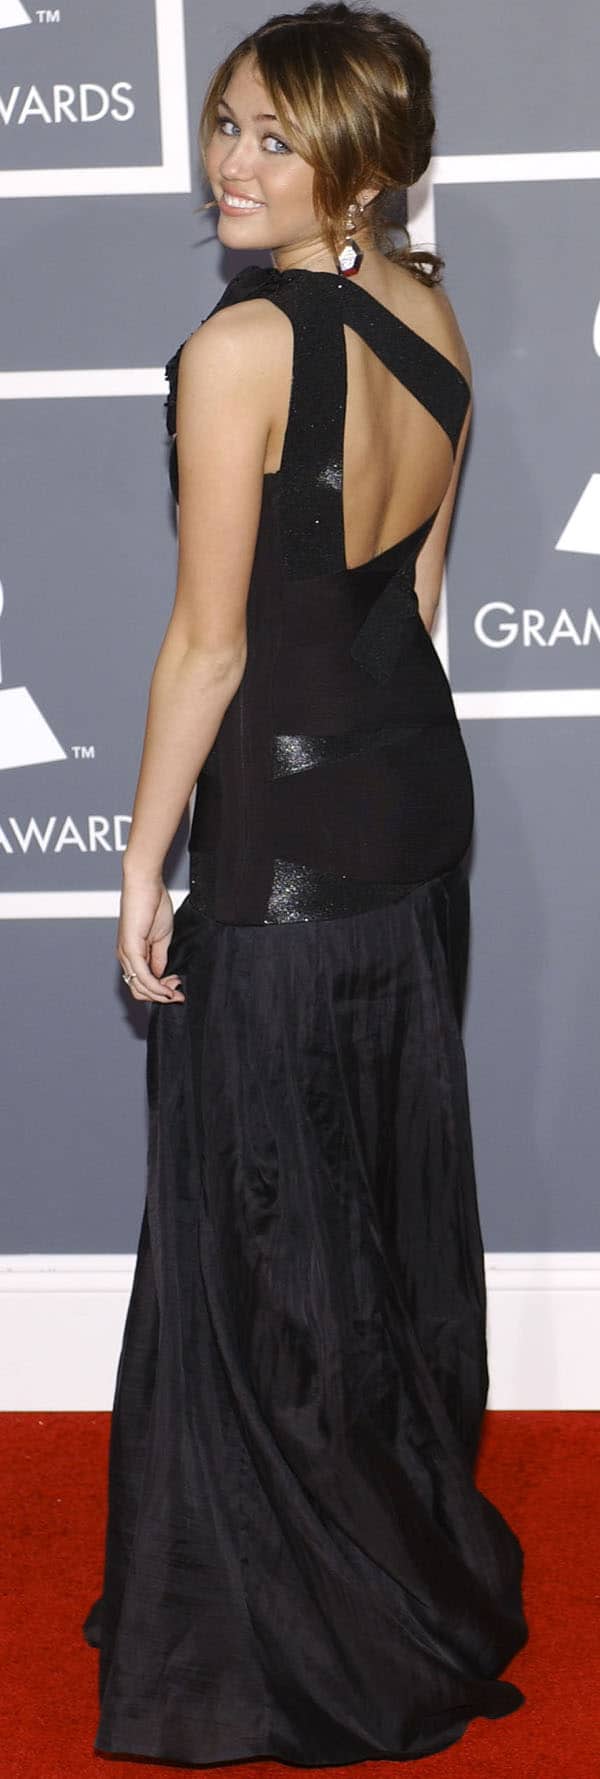 Miley Cyrus looked stunning in a long black cut-out Herve Leger dress